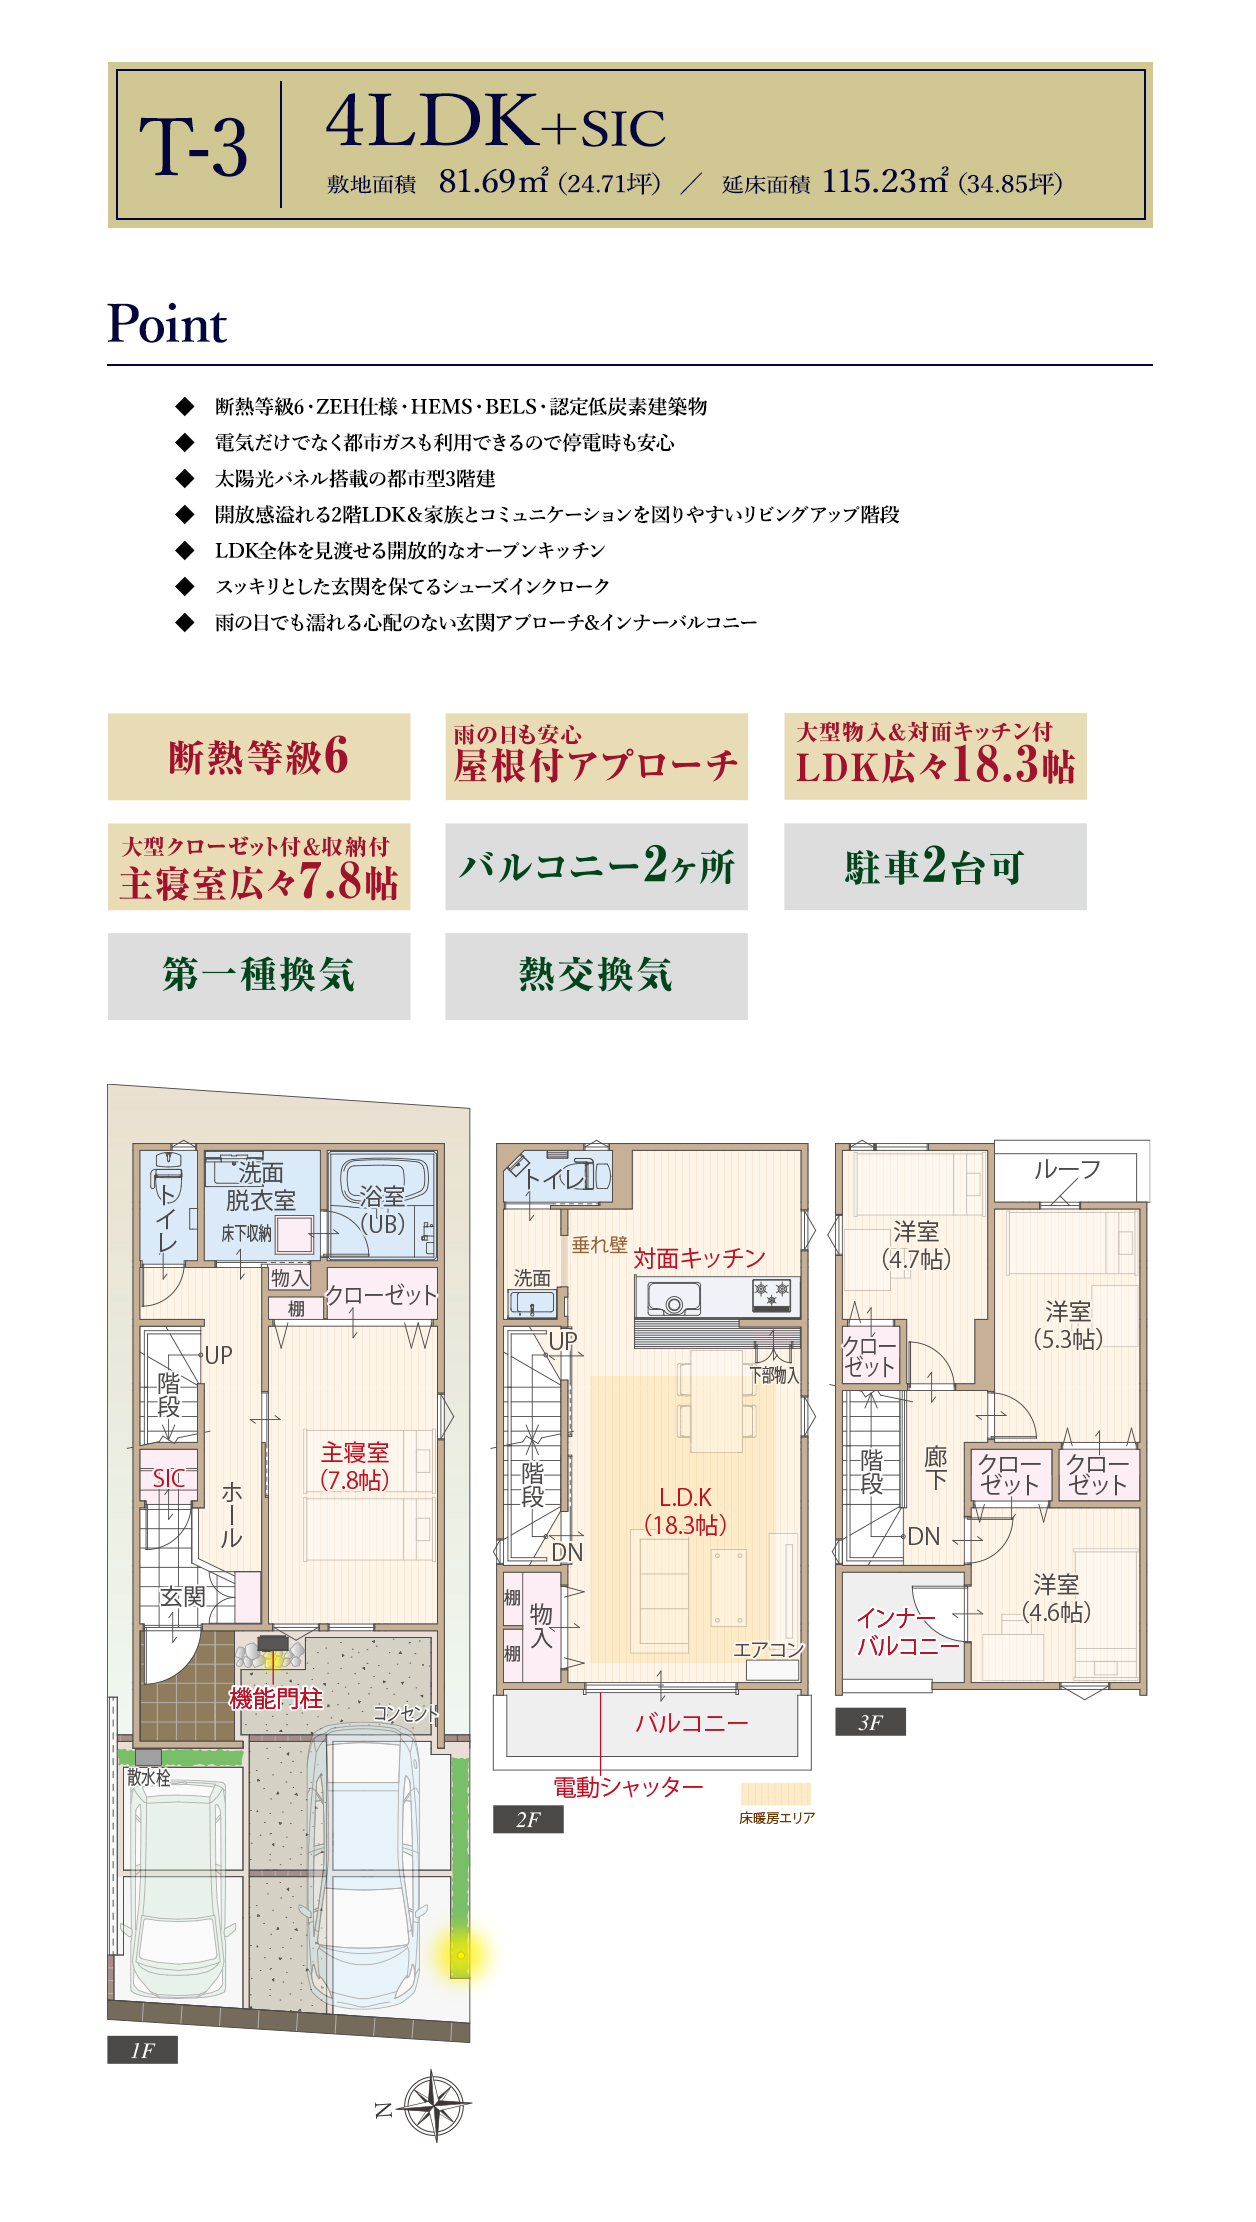 East Park Front　西区上小田井　T-3　間取り図